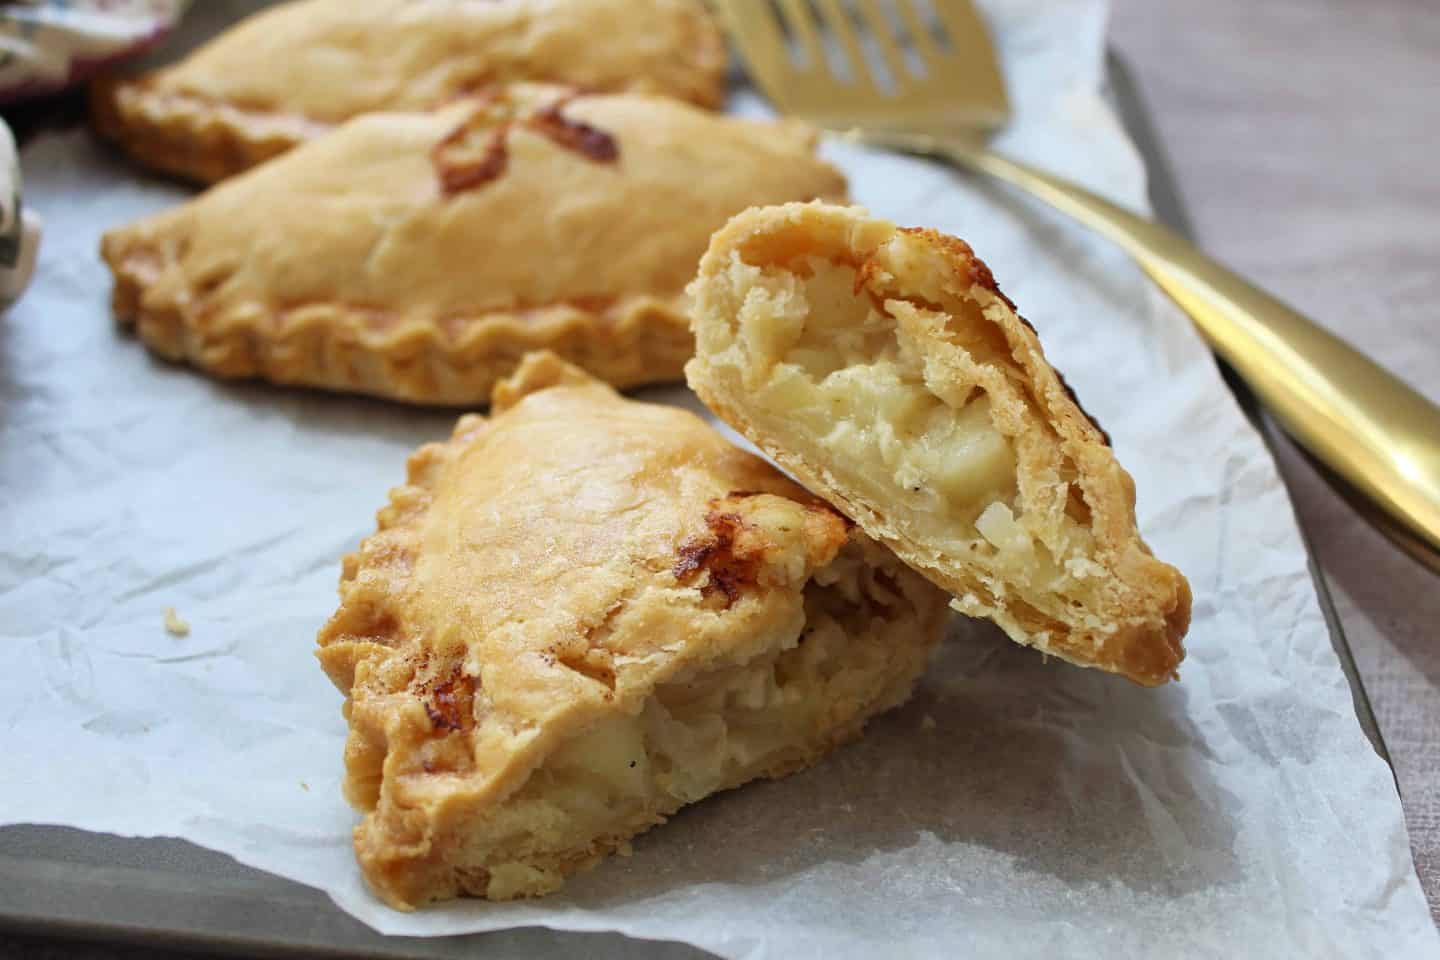 Gluten Free Cheese and Onion Pasty - The Gluten Free Blogger